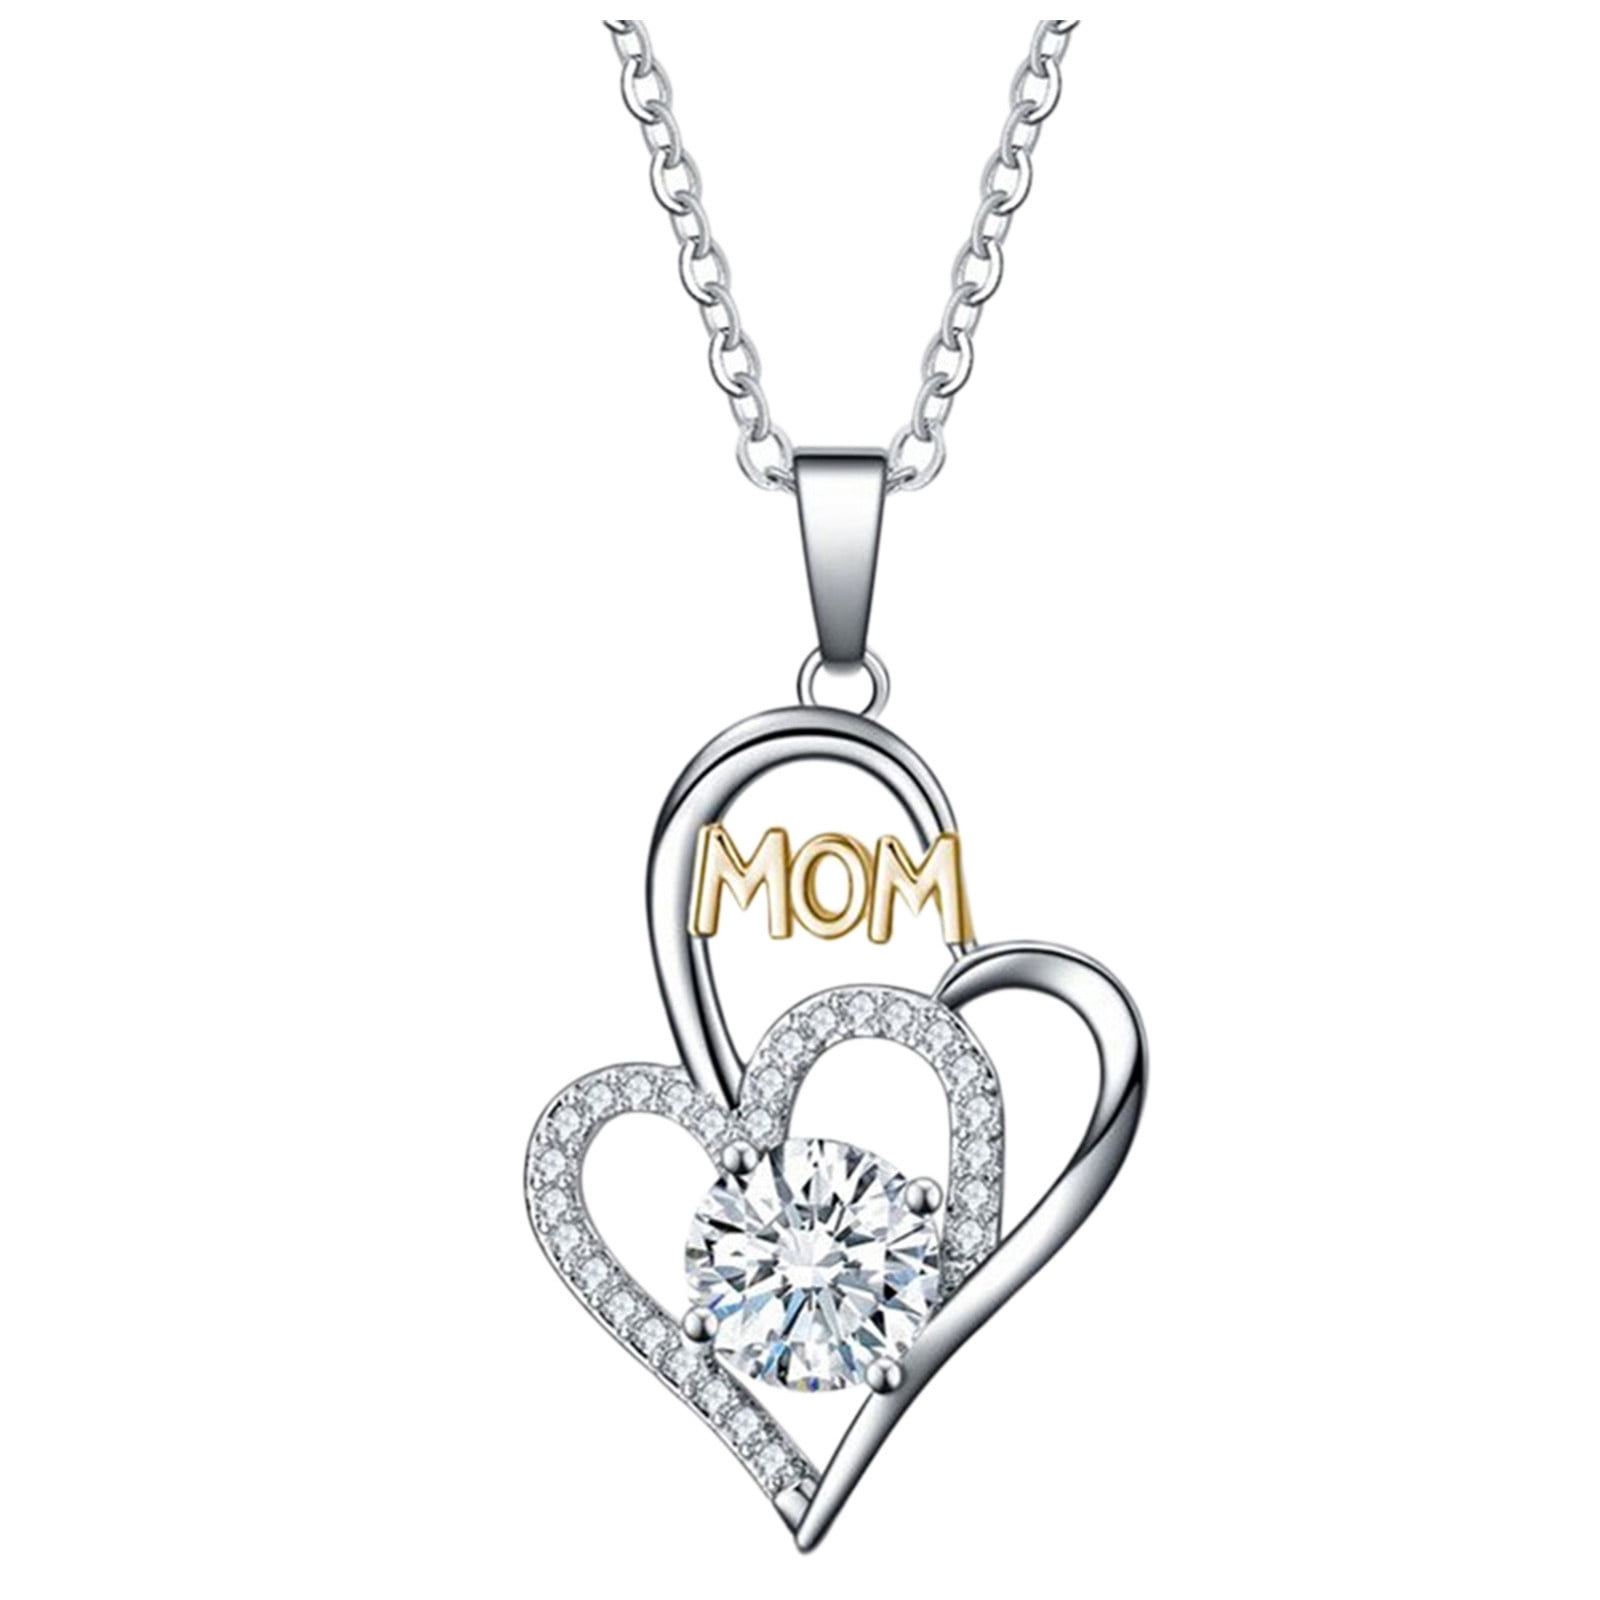 Family/Mom Initial Necklace for Mom in Sterling Silver - MYKA